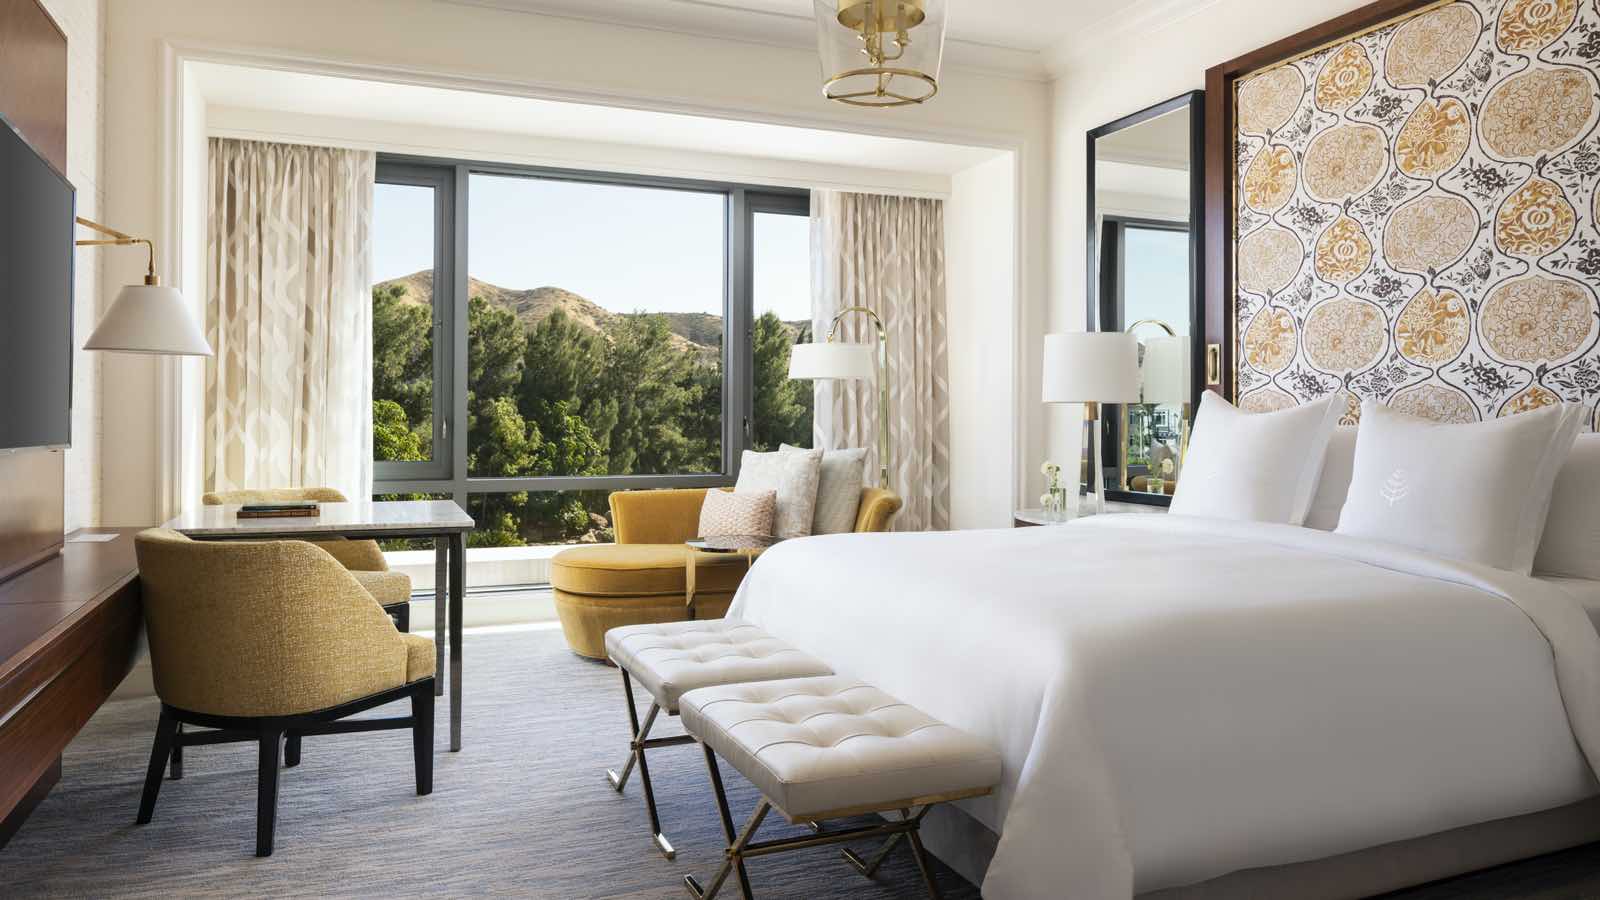 Four Seasons Westlake Village bedroom with view over mountains